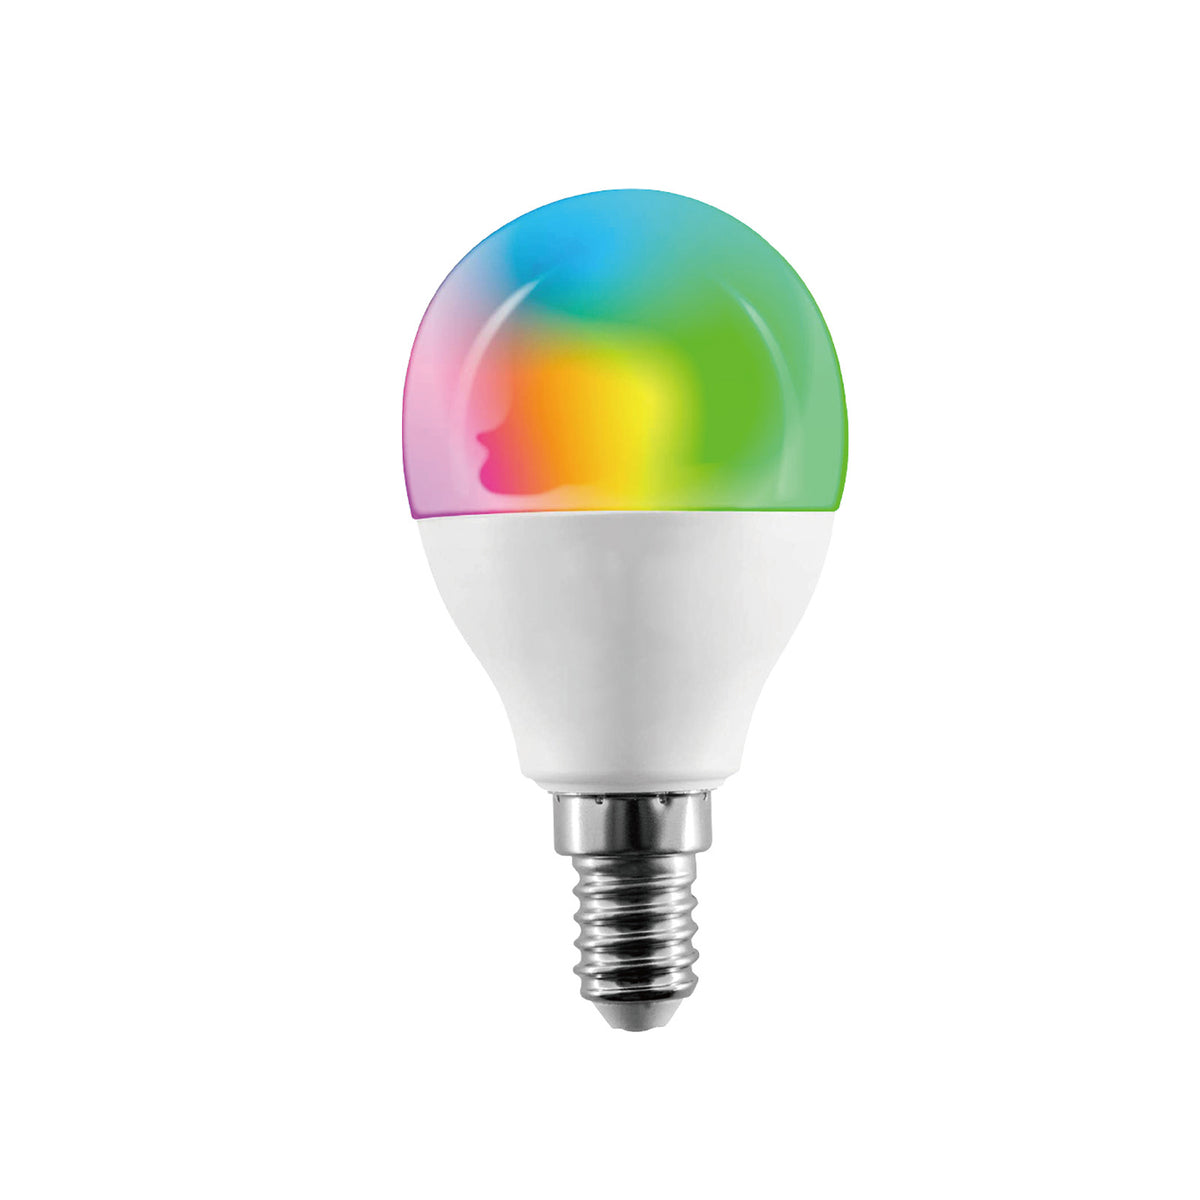 Intelligent 5.5W light bulb with a dimmable lumen with compatible application with Google and Alexa